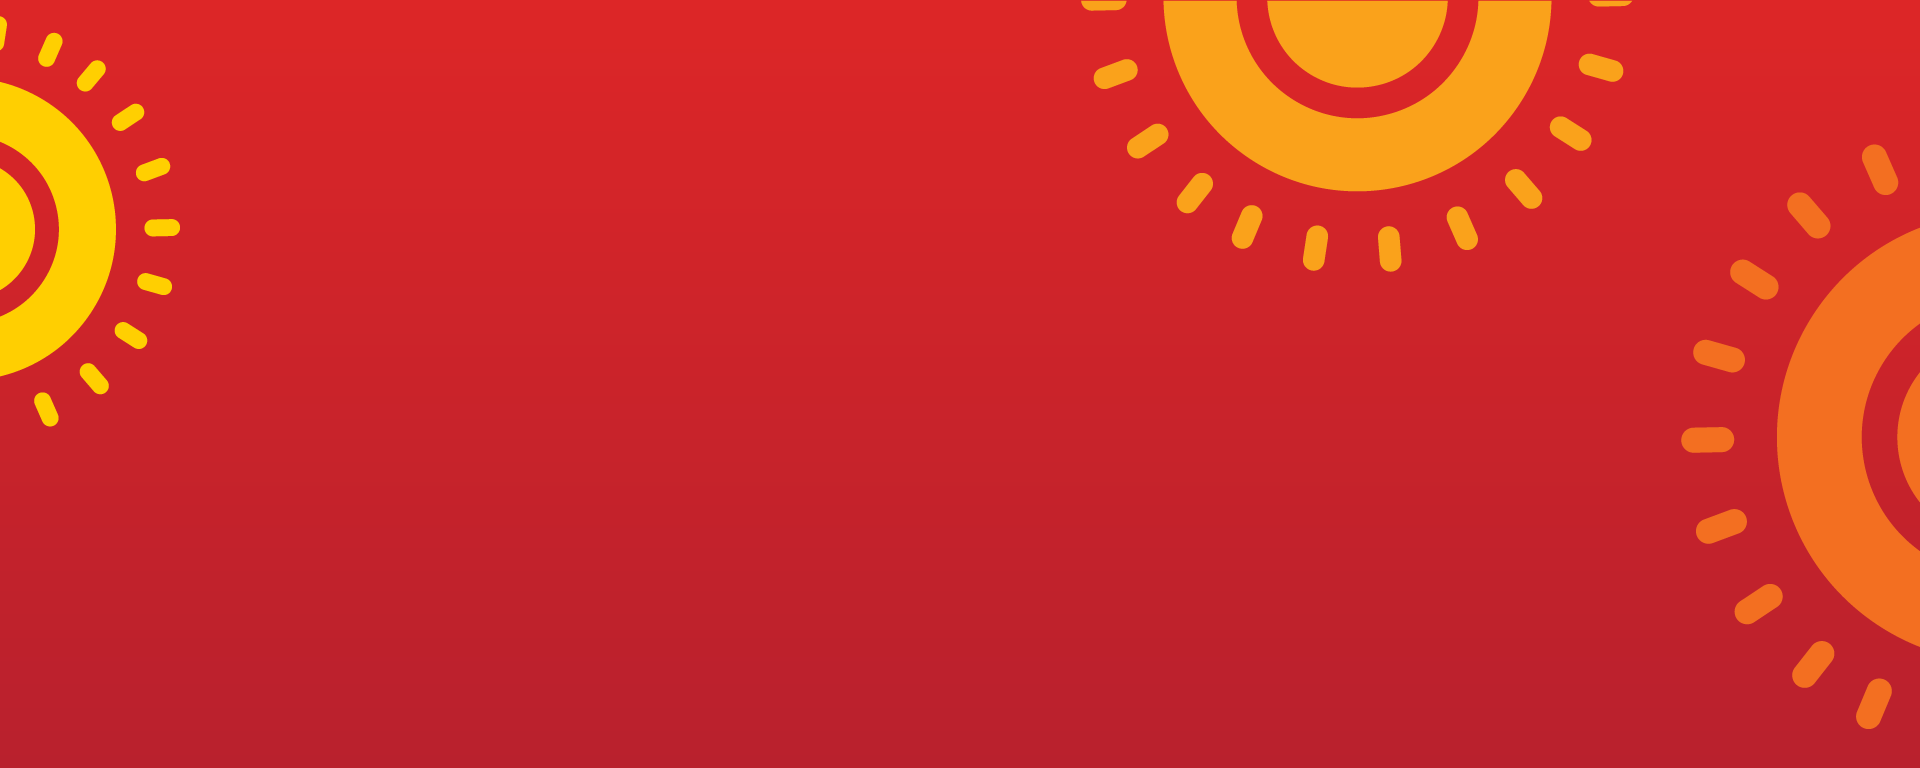 Red background with yellow, gold and orange sun graphics